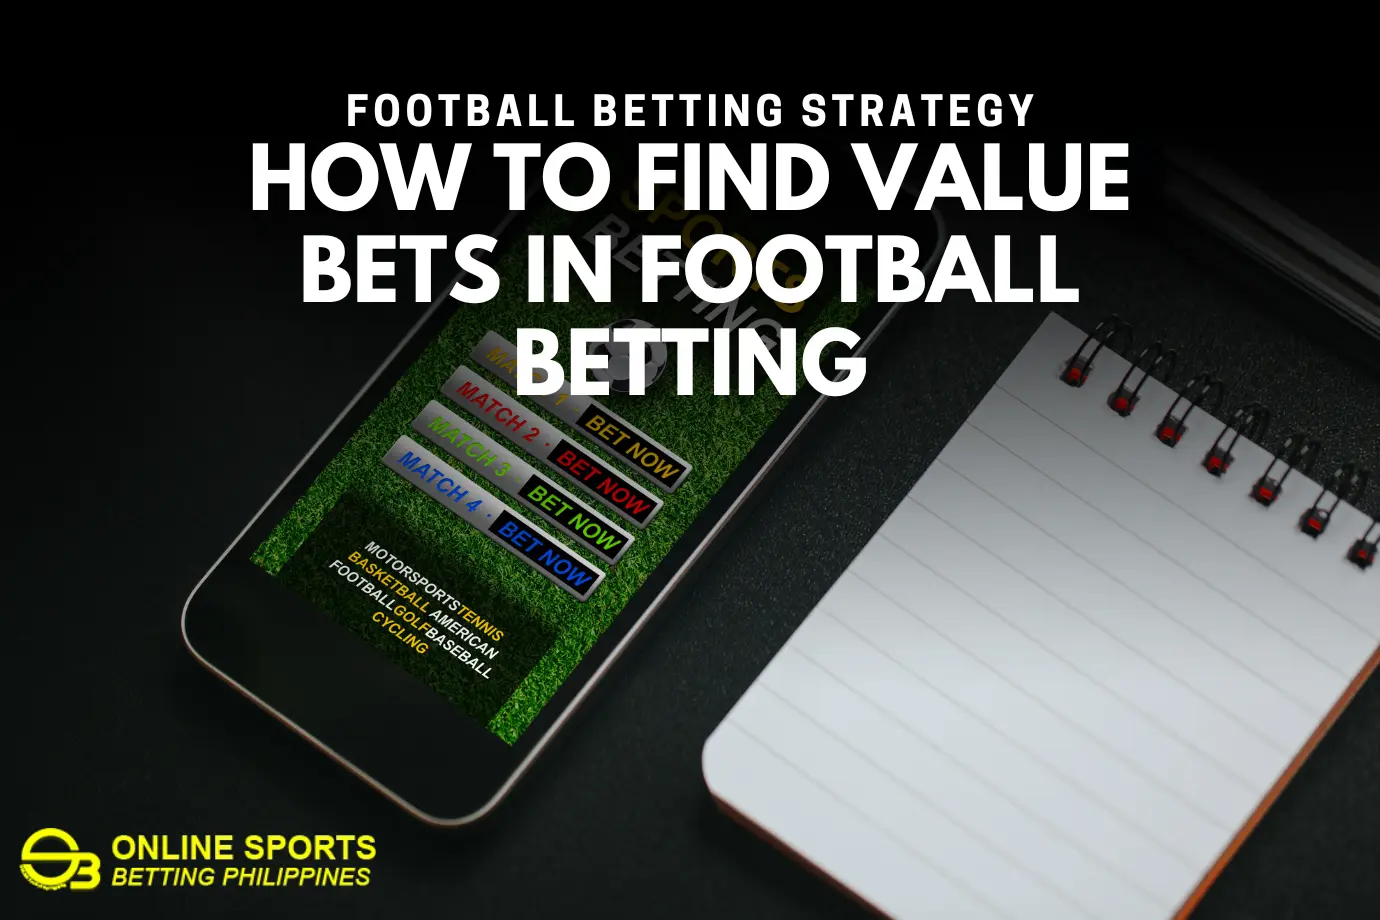 How to Find Value Bets in Football Betting